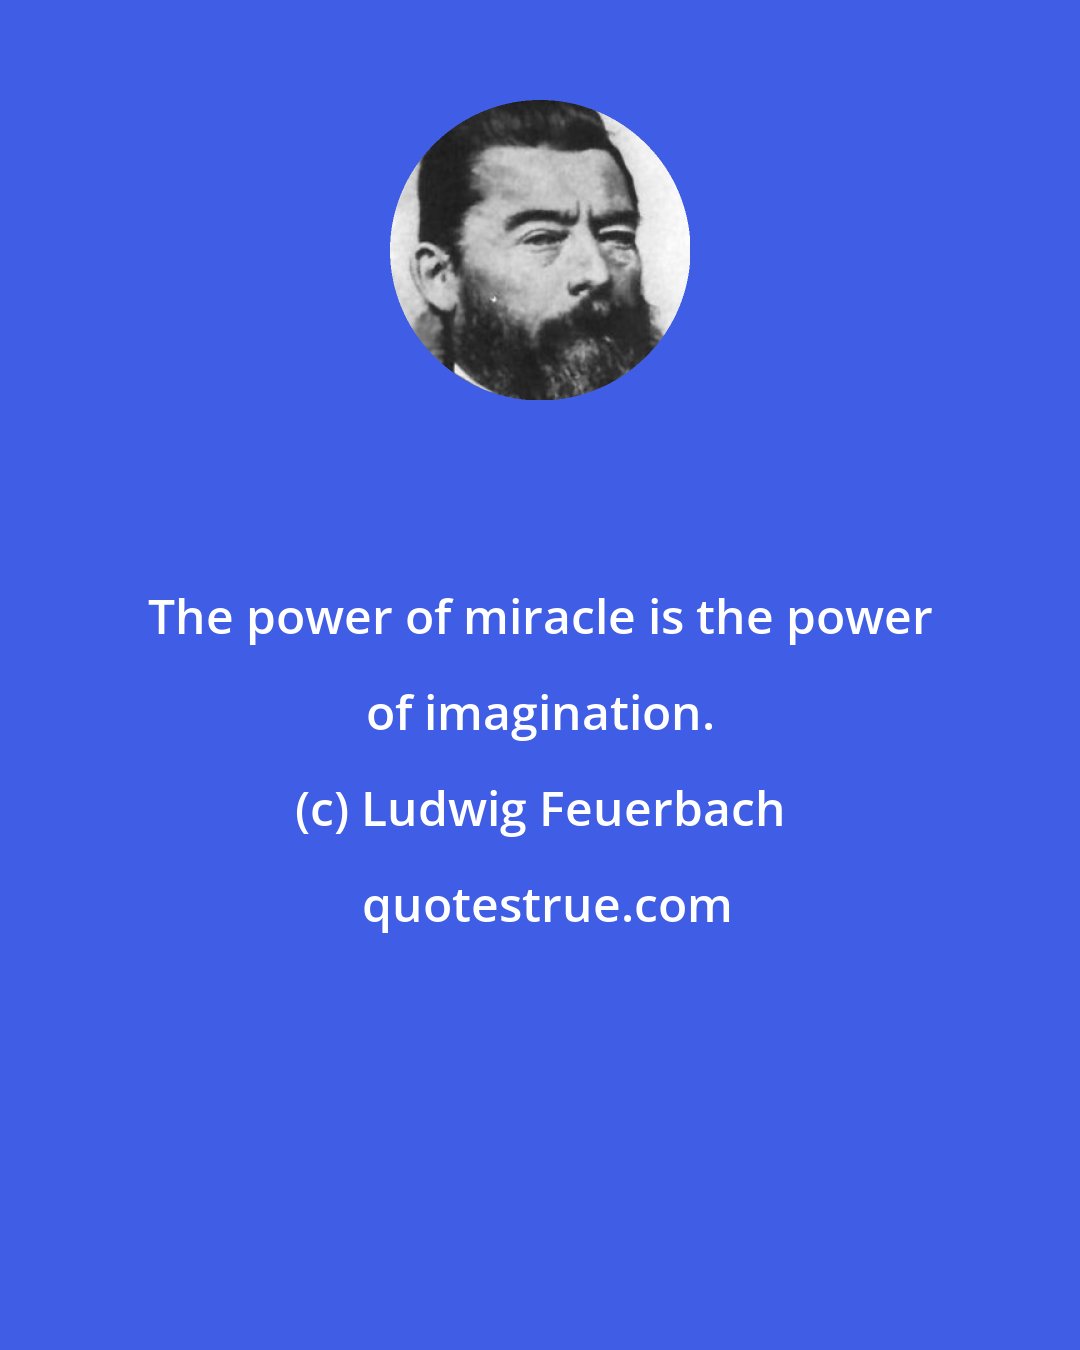 Ludwig Feuerbach: The power of miracle is the power of imagination.